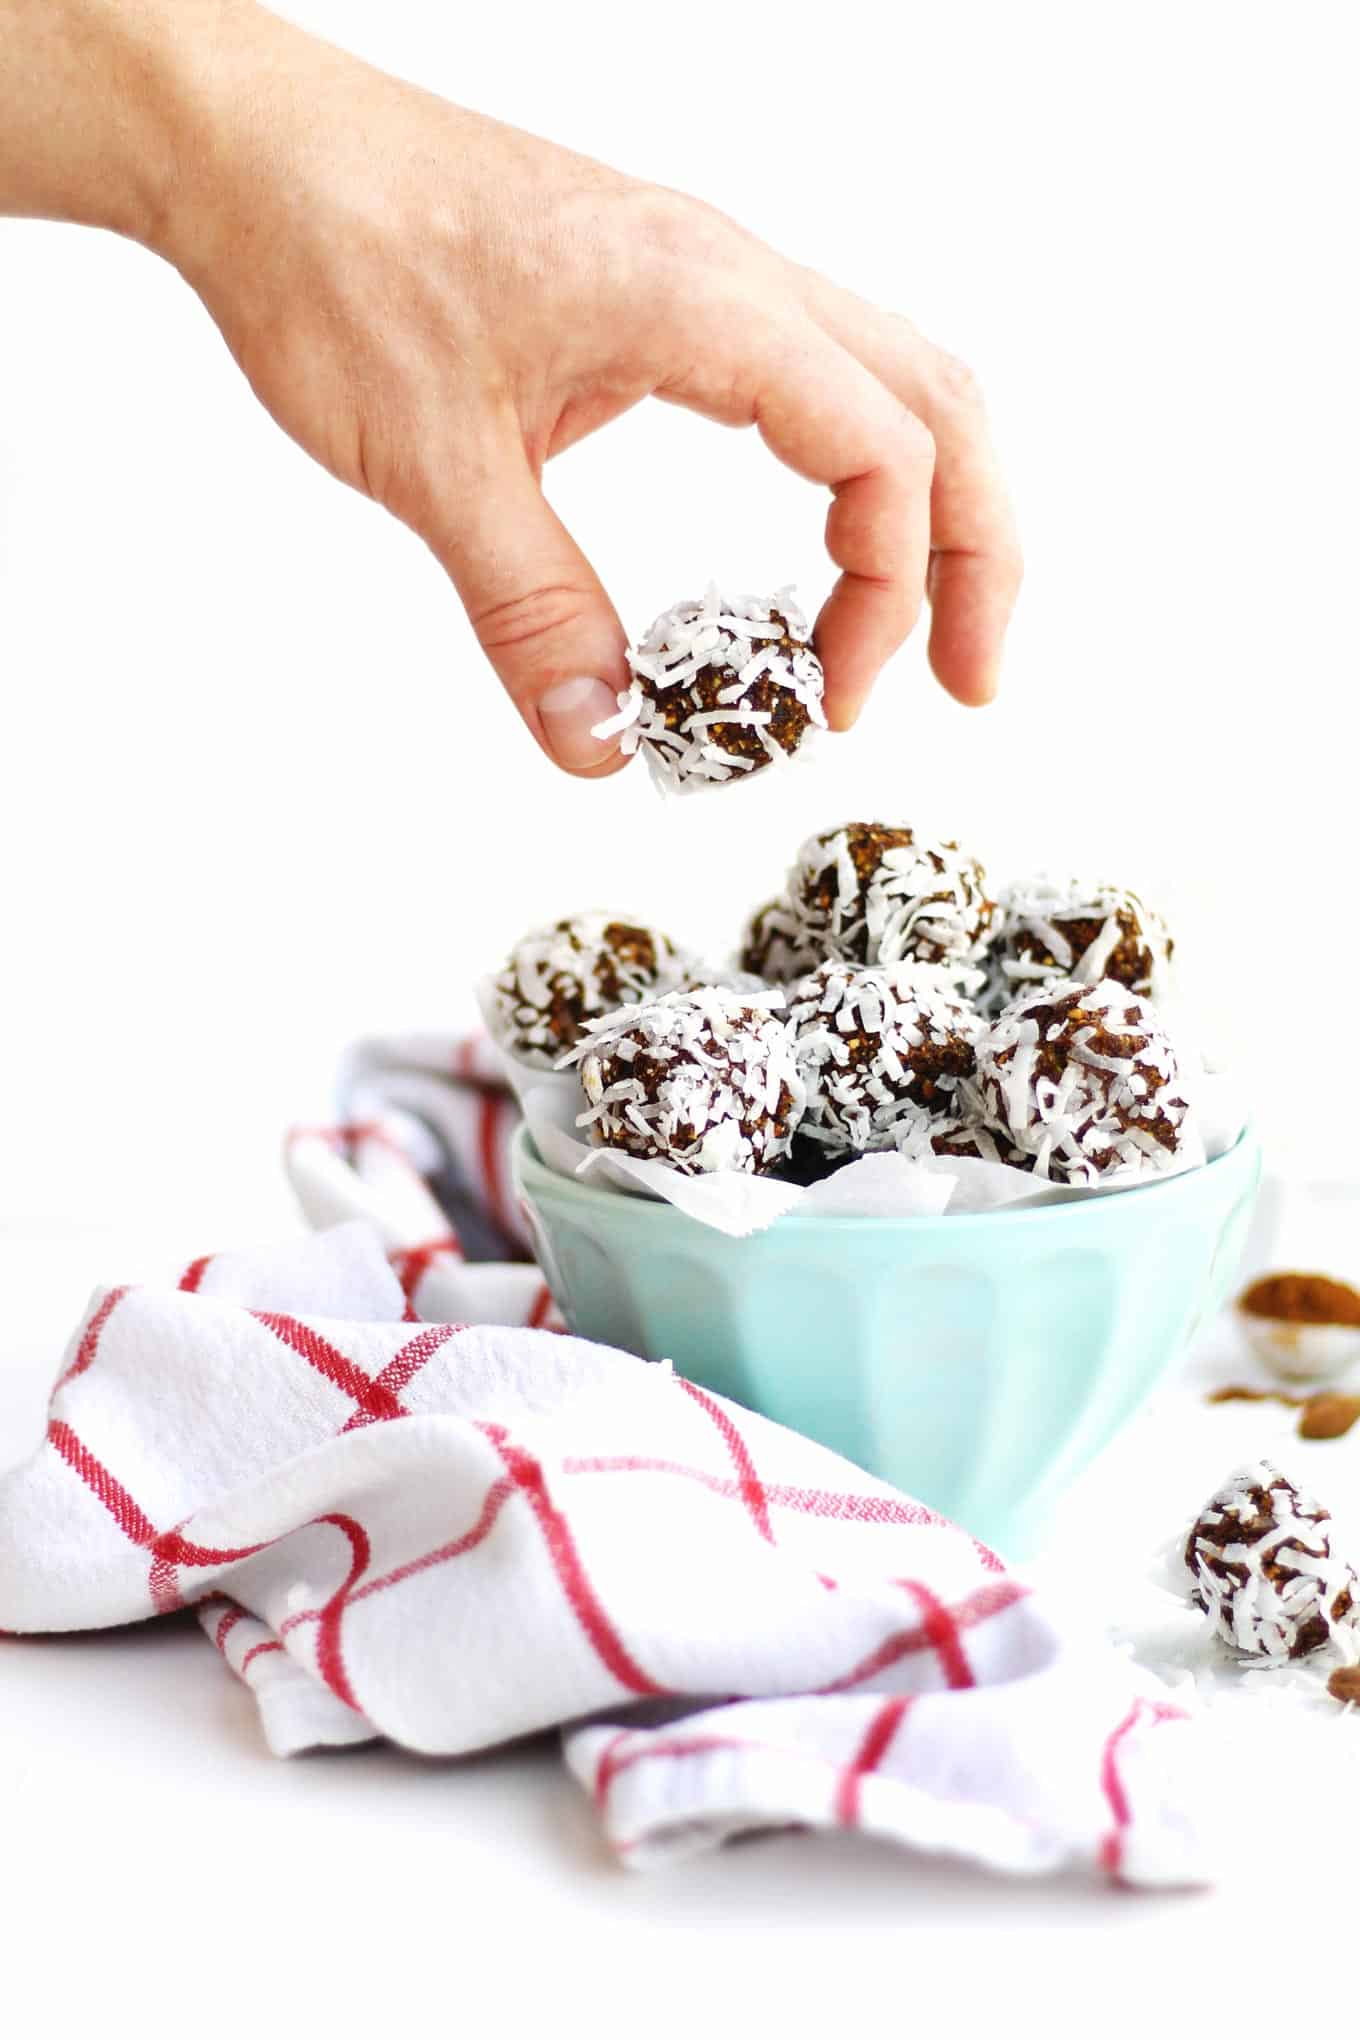 Plum and pistachio coconut bliss balls recipe! These protein packed coconut bites are the perfect quick snack or healthy treat. Vegan and gluten free. // Rhubarbarians